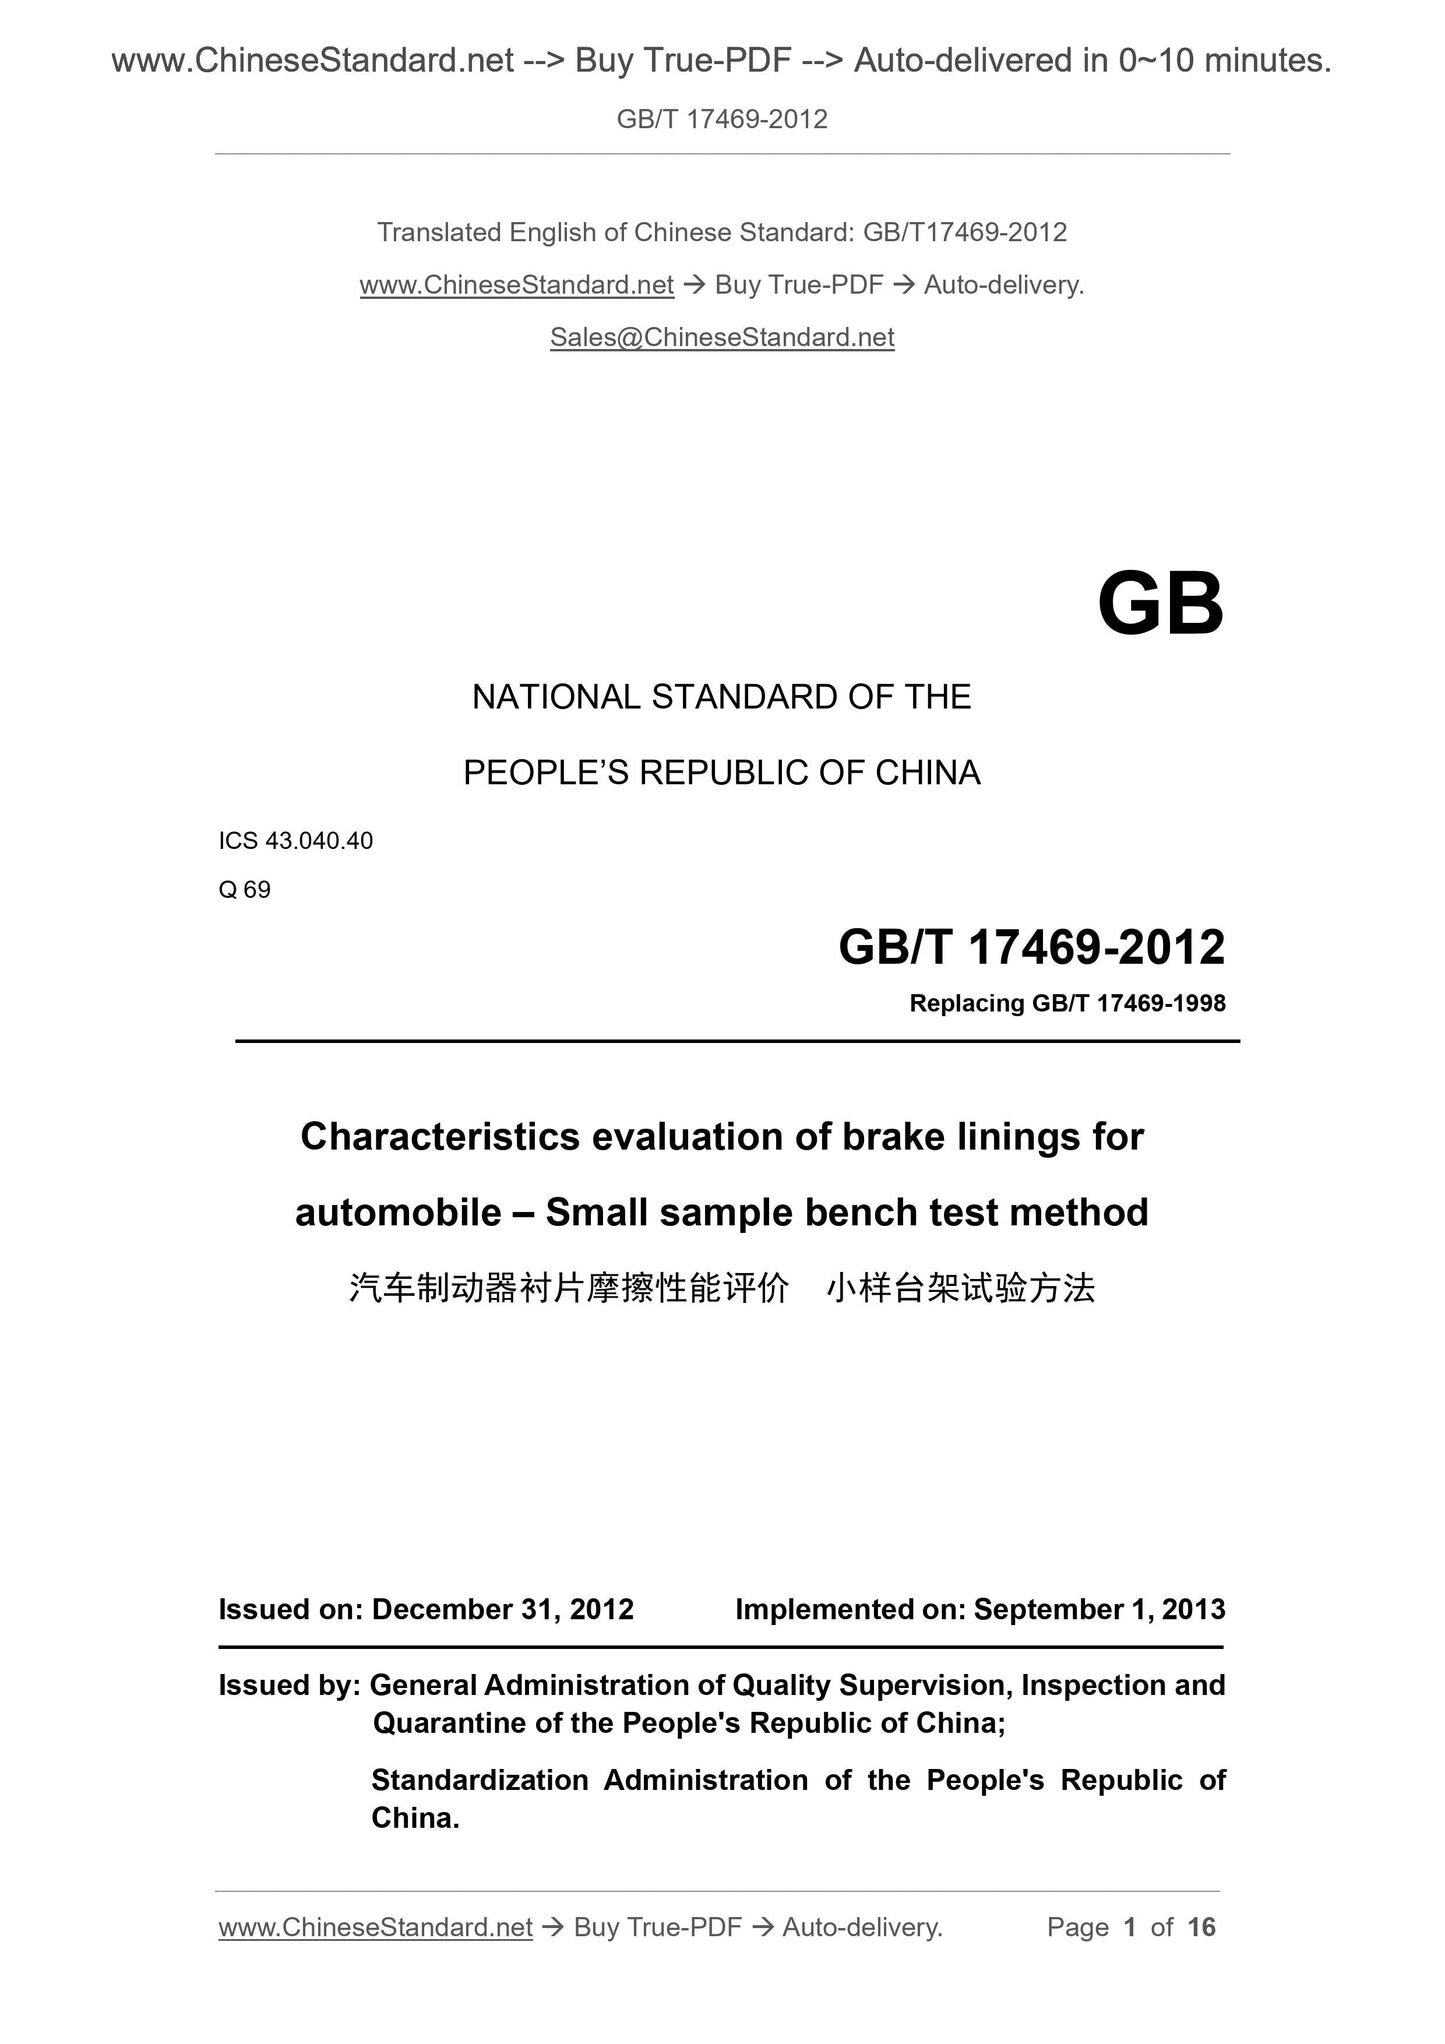 GB/T 17469-2012 Page 1